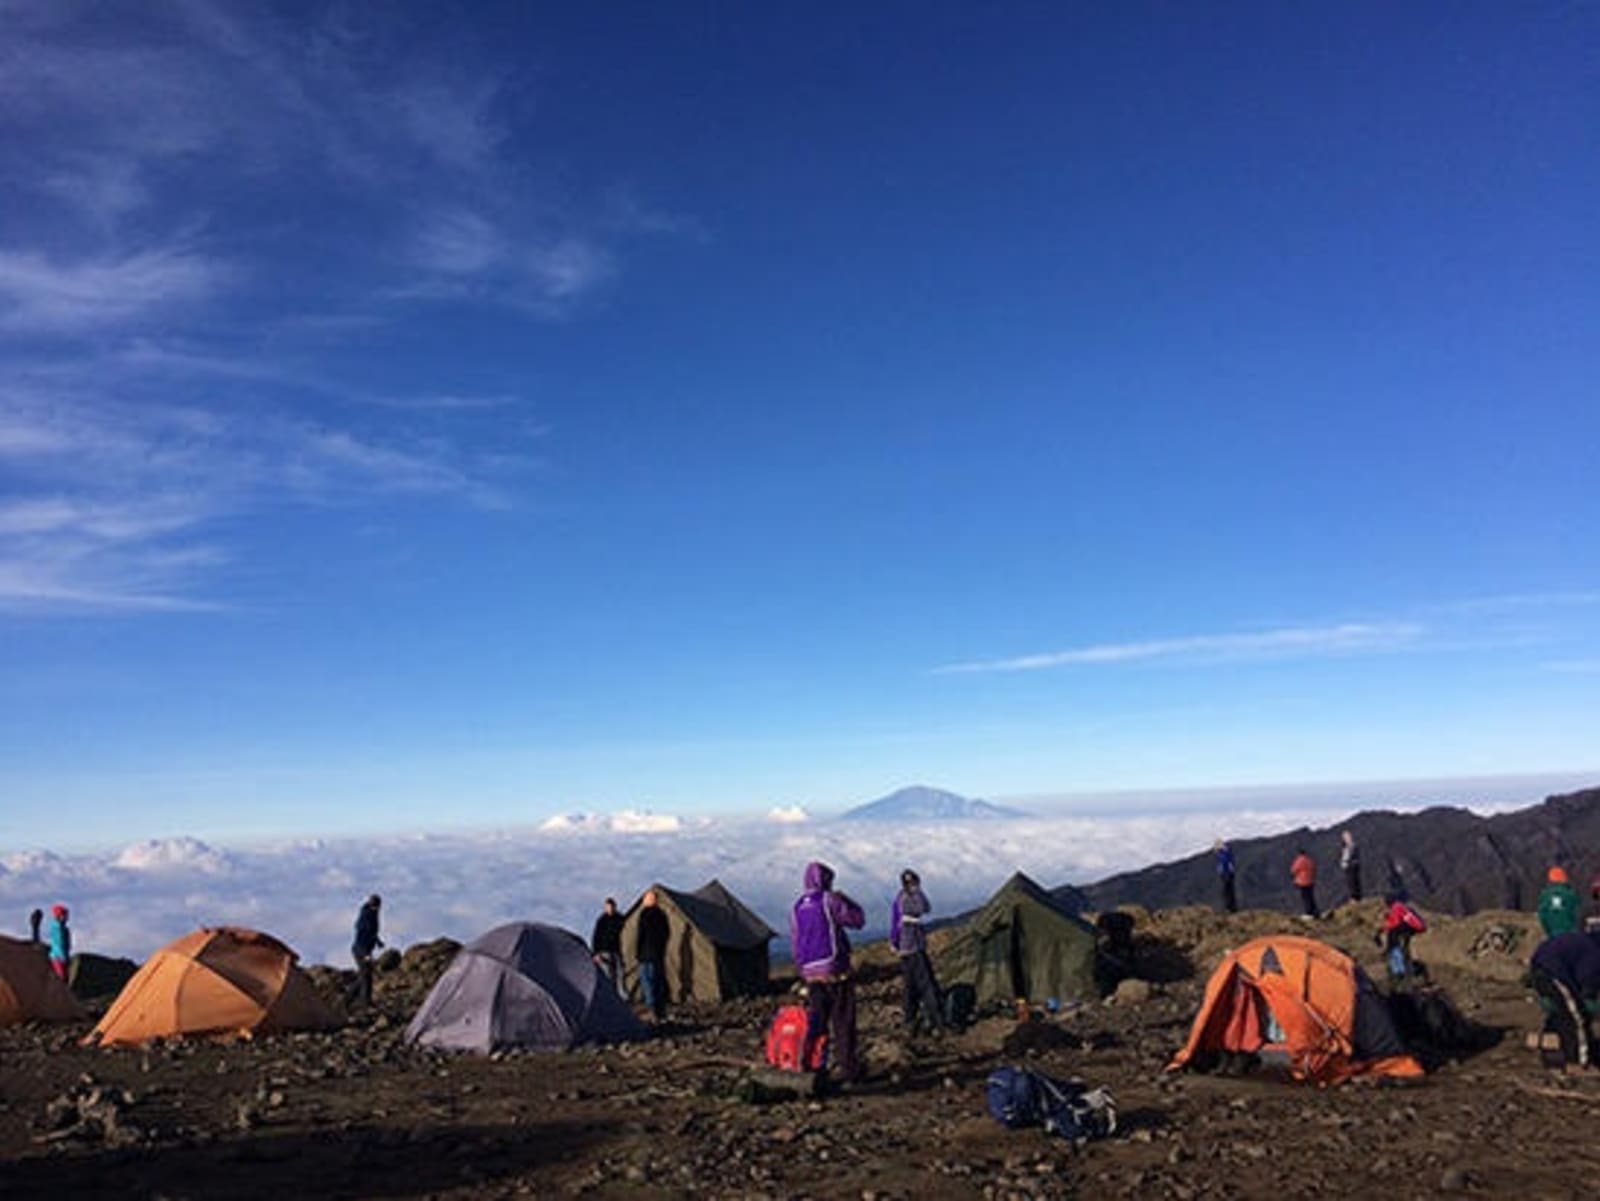 RS-3.-Tents-picthed-high-above-the-clouds.jpg